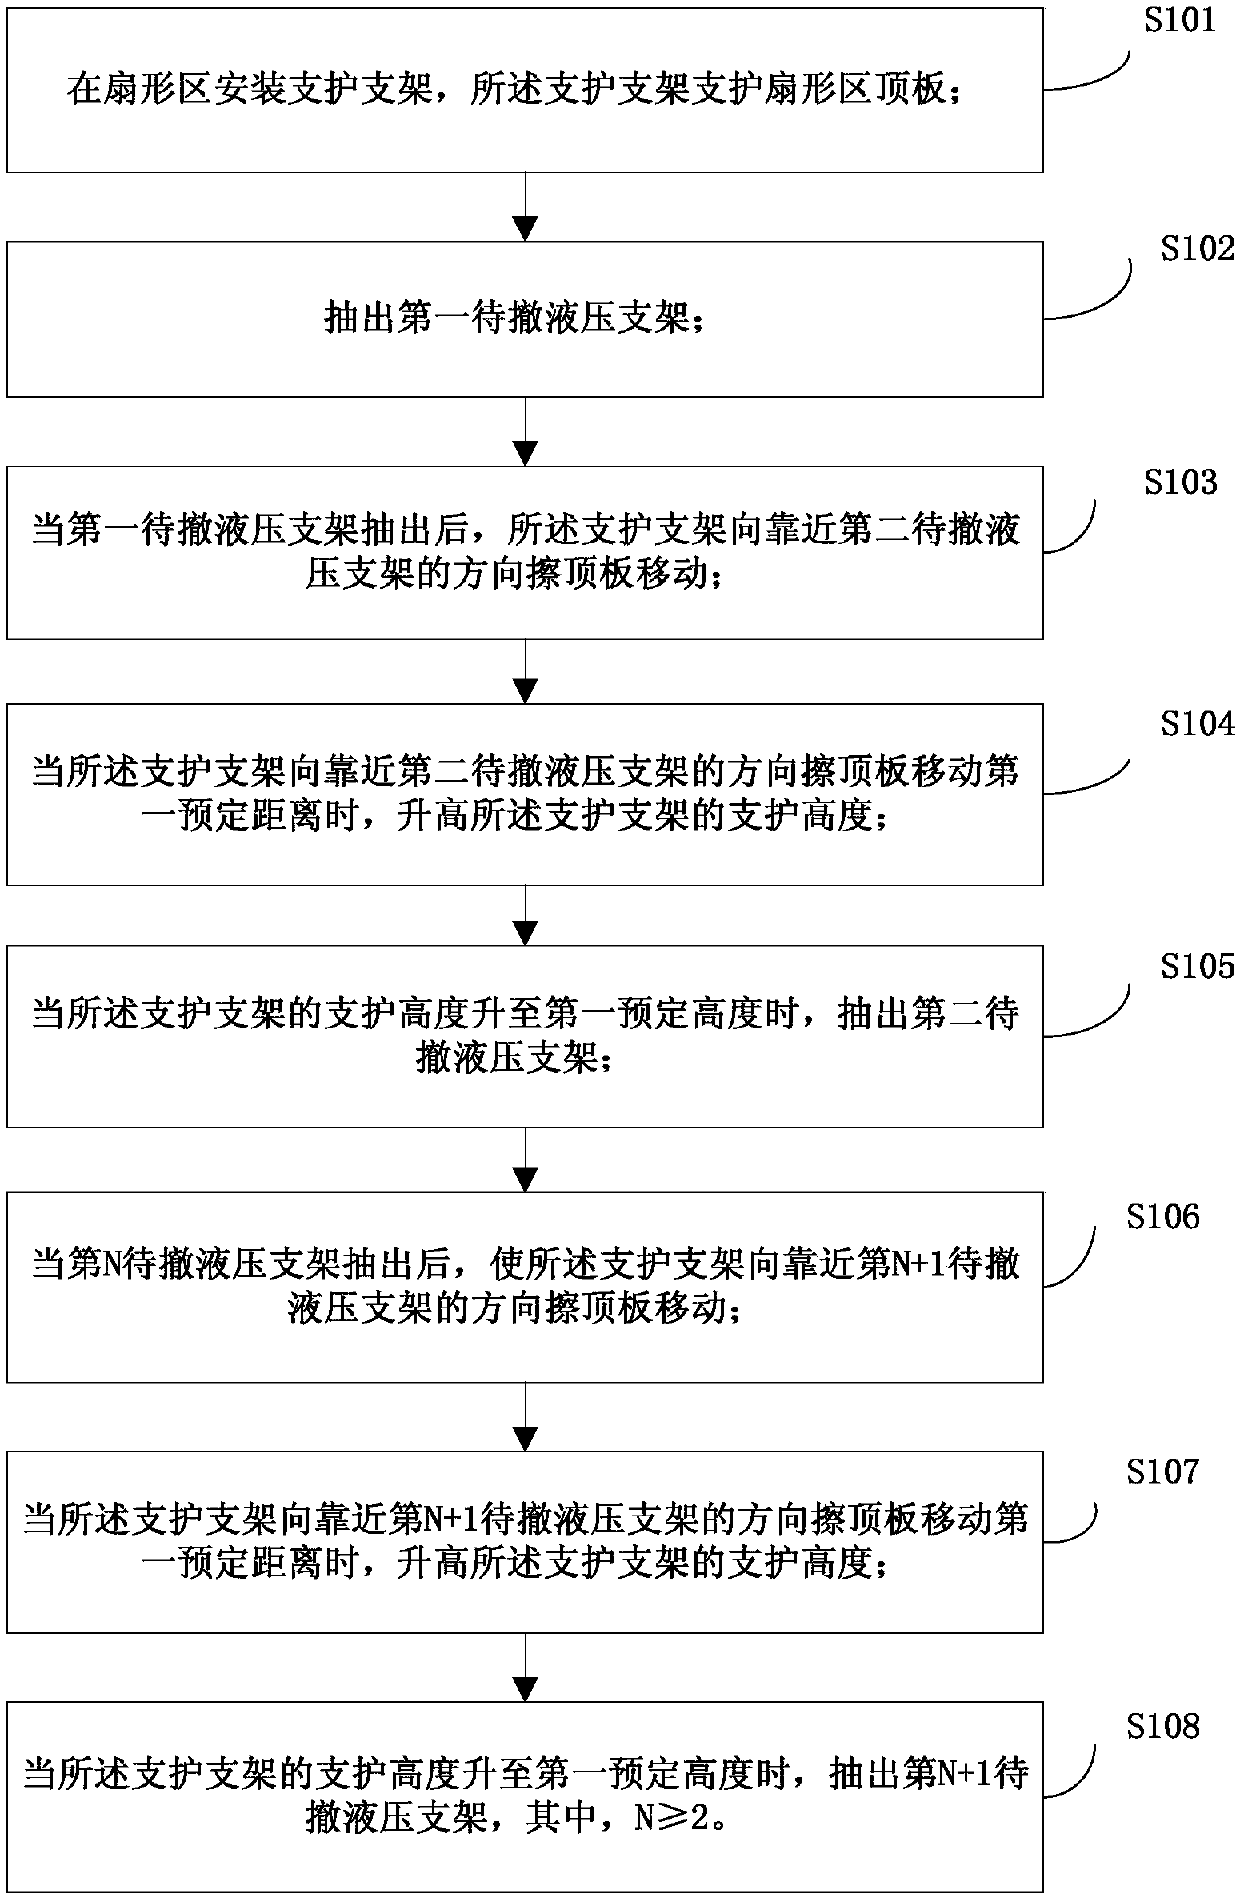 Retracement method for fan section of fully-mechanized coal mining retracement working face